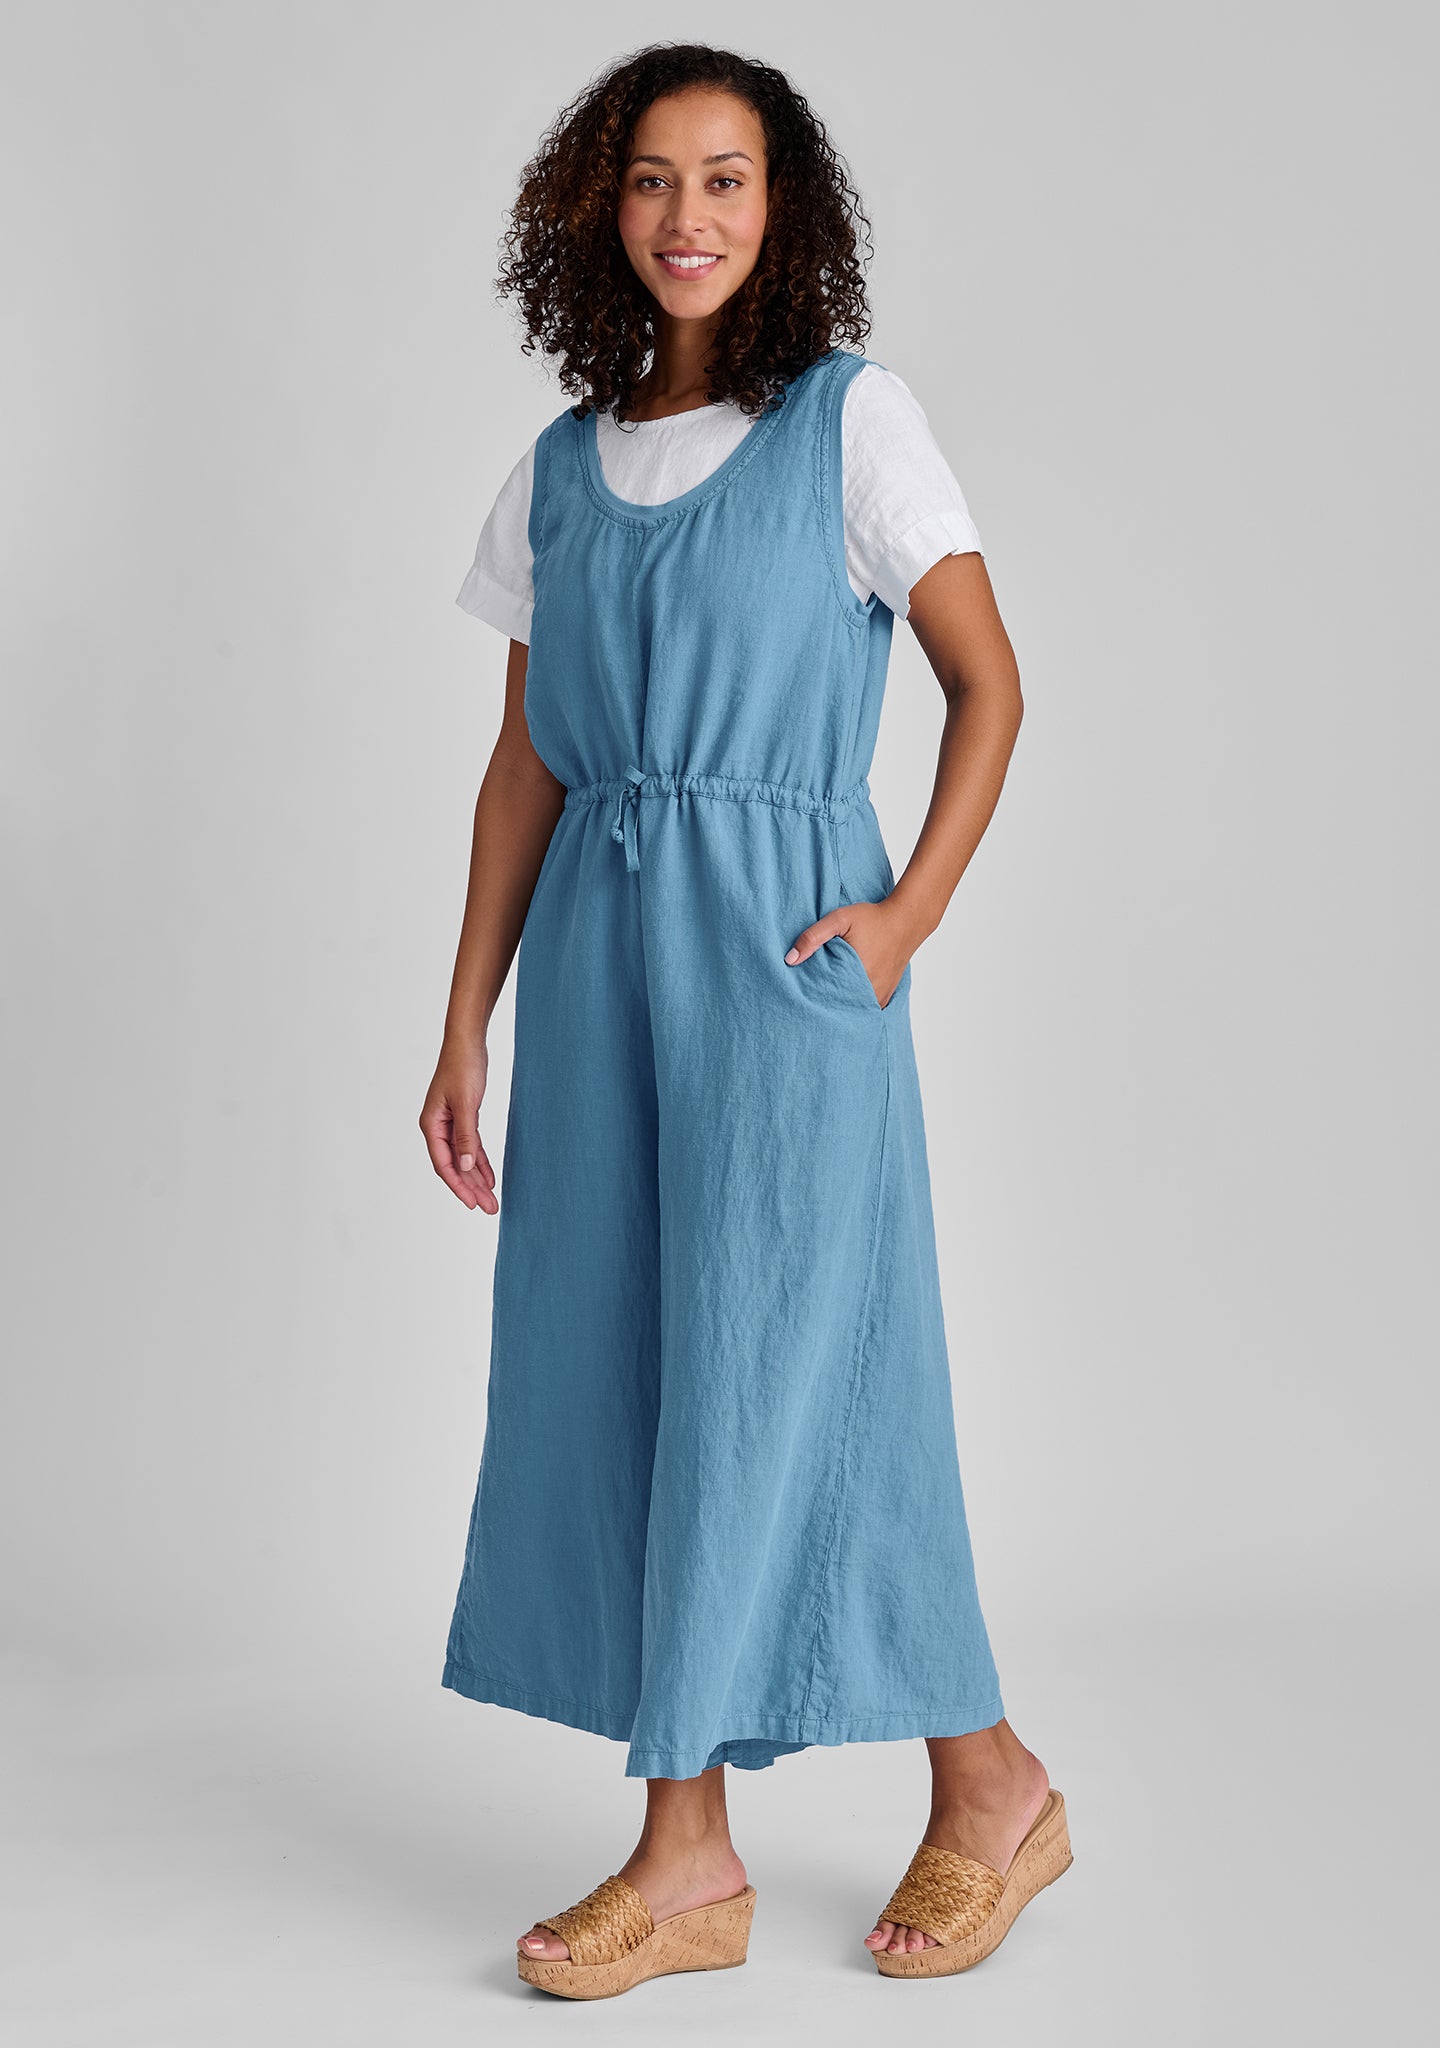 FLAX linen tee in white with linen jumpsuit in blue